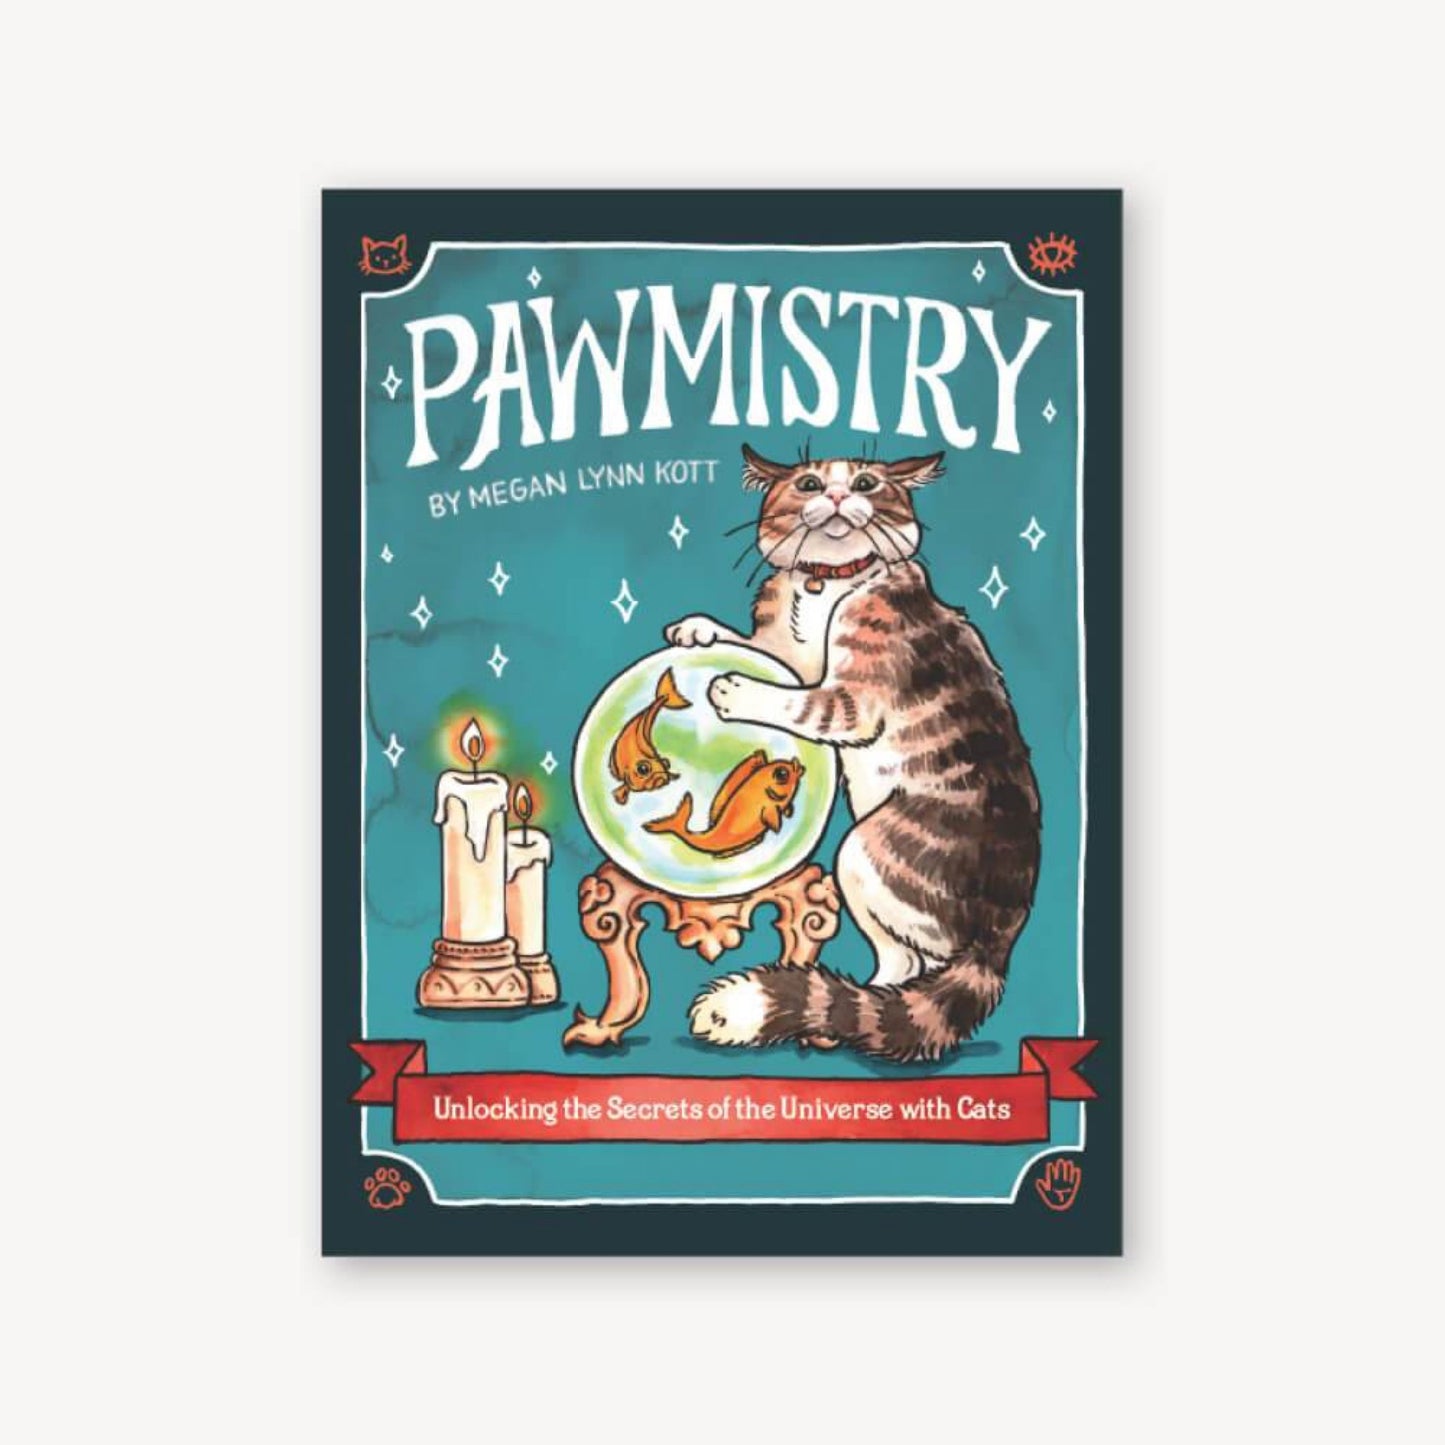 Pawmistry - Unlocking the Secrets of the Universe with Cats (book)